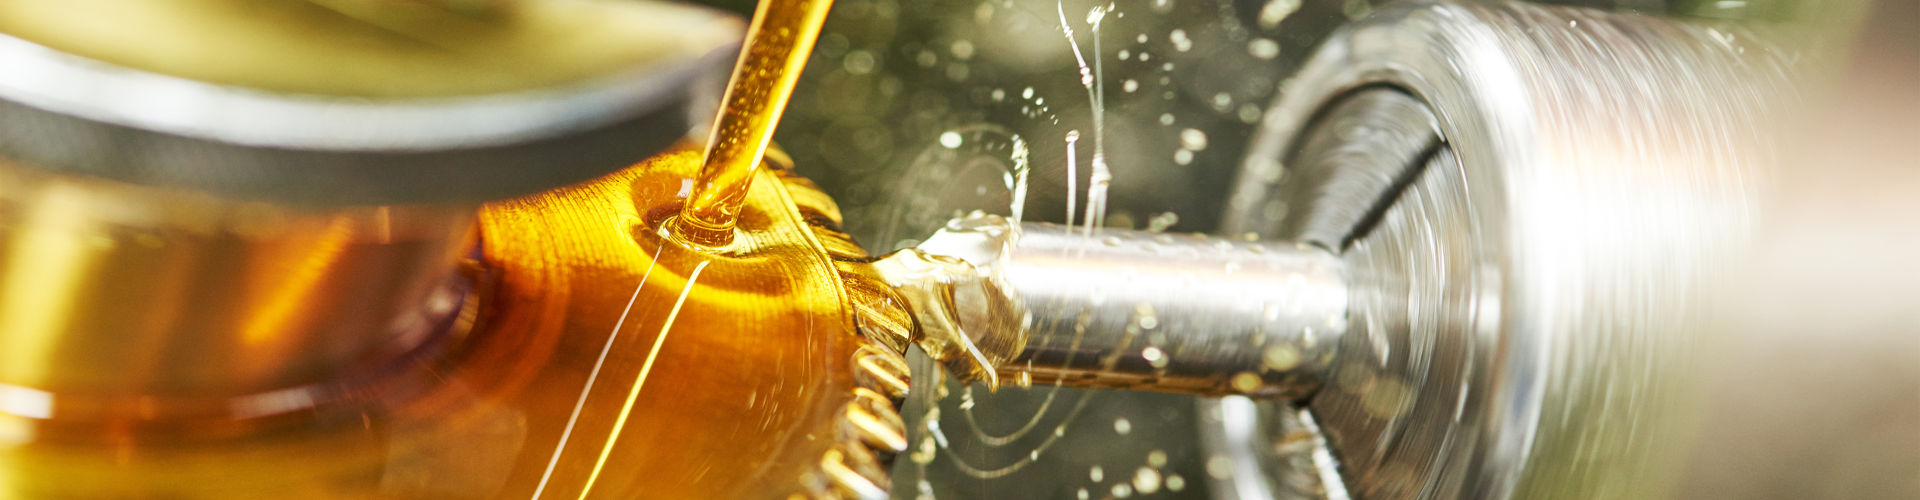 Industrial Oil, Chemicals and Industrial Lubricants